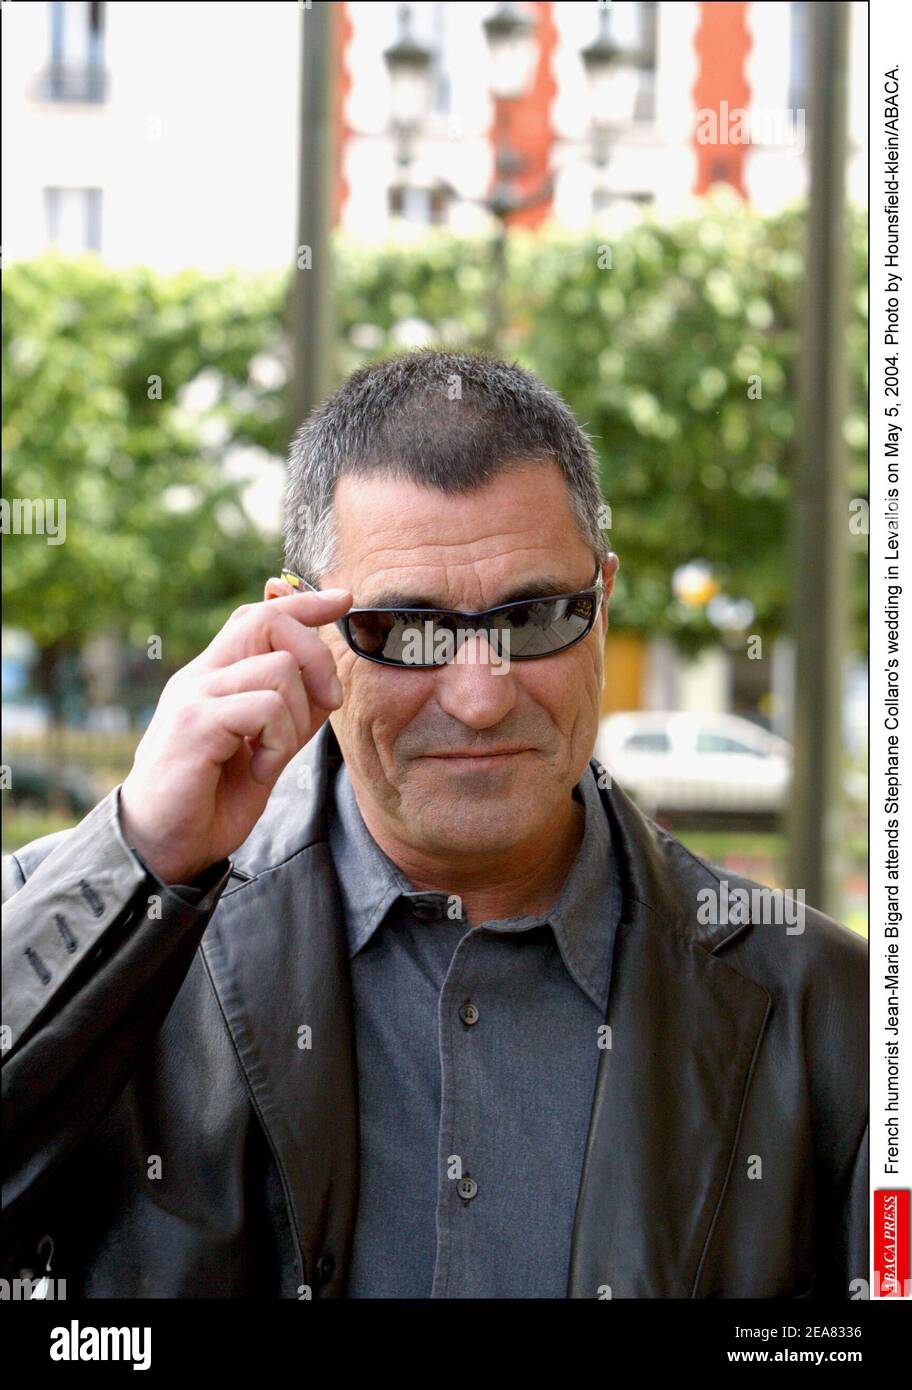 French humorist Jean-Marie Bigard attends Stephane Collaro's wedding in Levallois on May 5, 2004. Photo by Hounsfield-klein/ABACA. Stock Photo